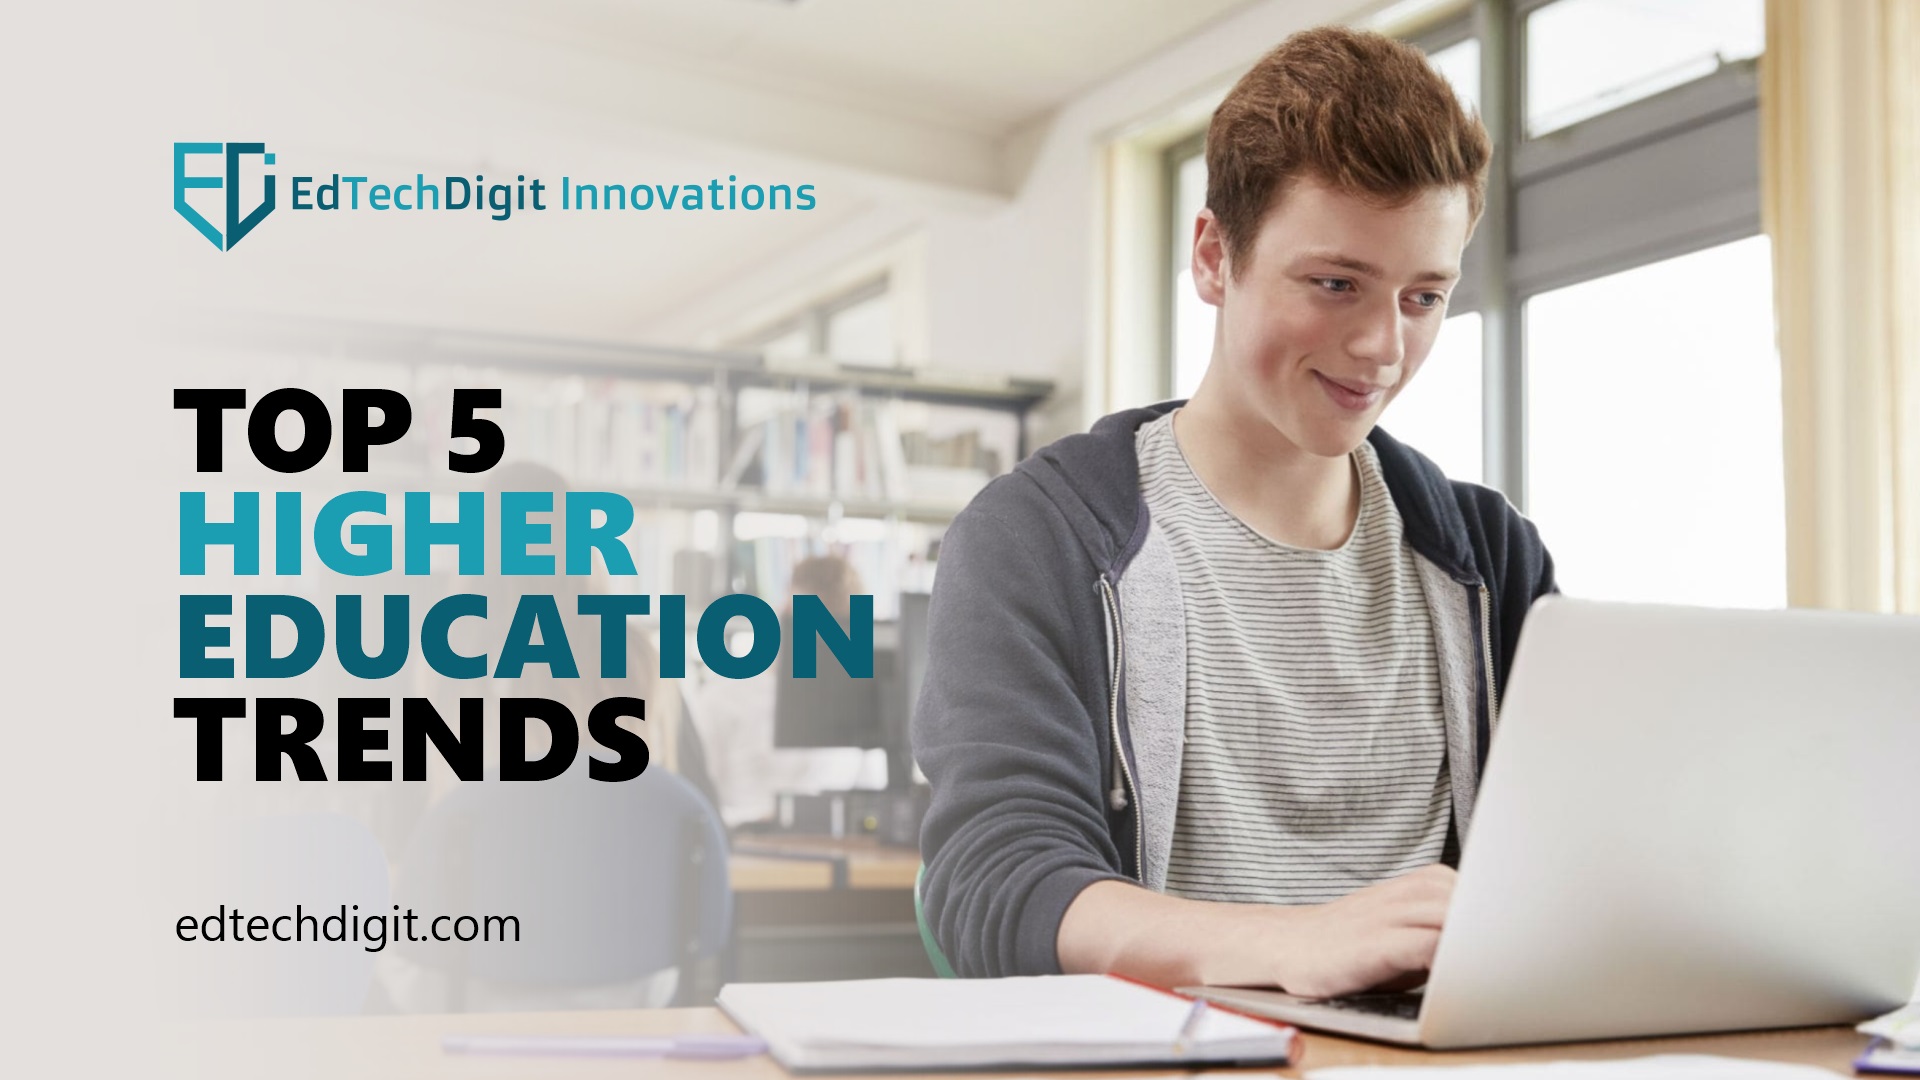 What are the Top 5 Higher Education Trends to Watch Out For?